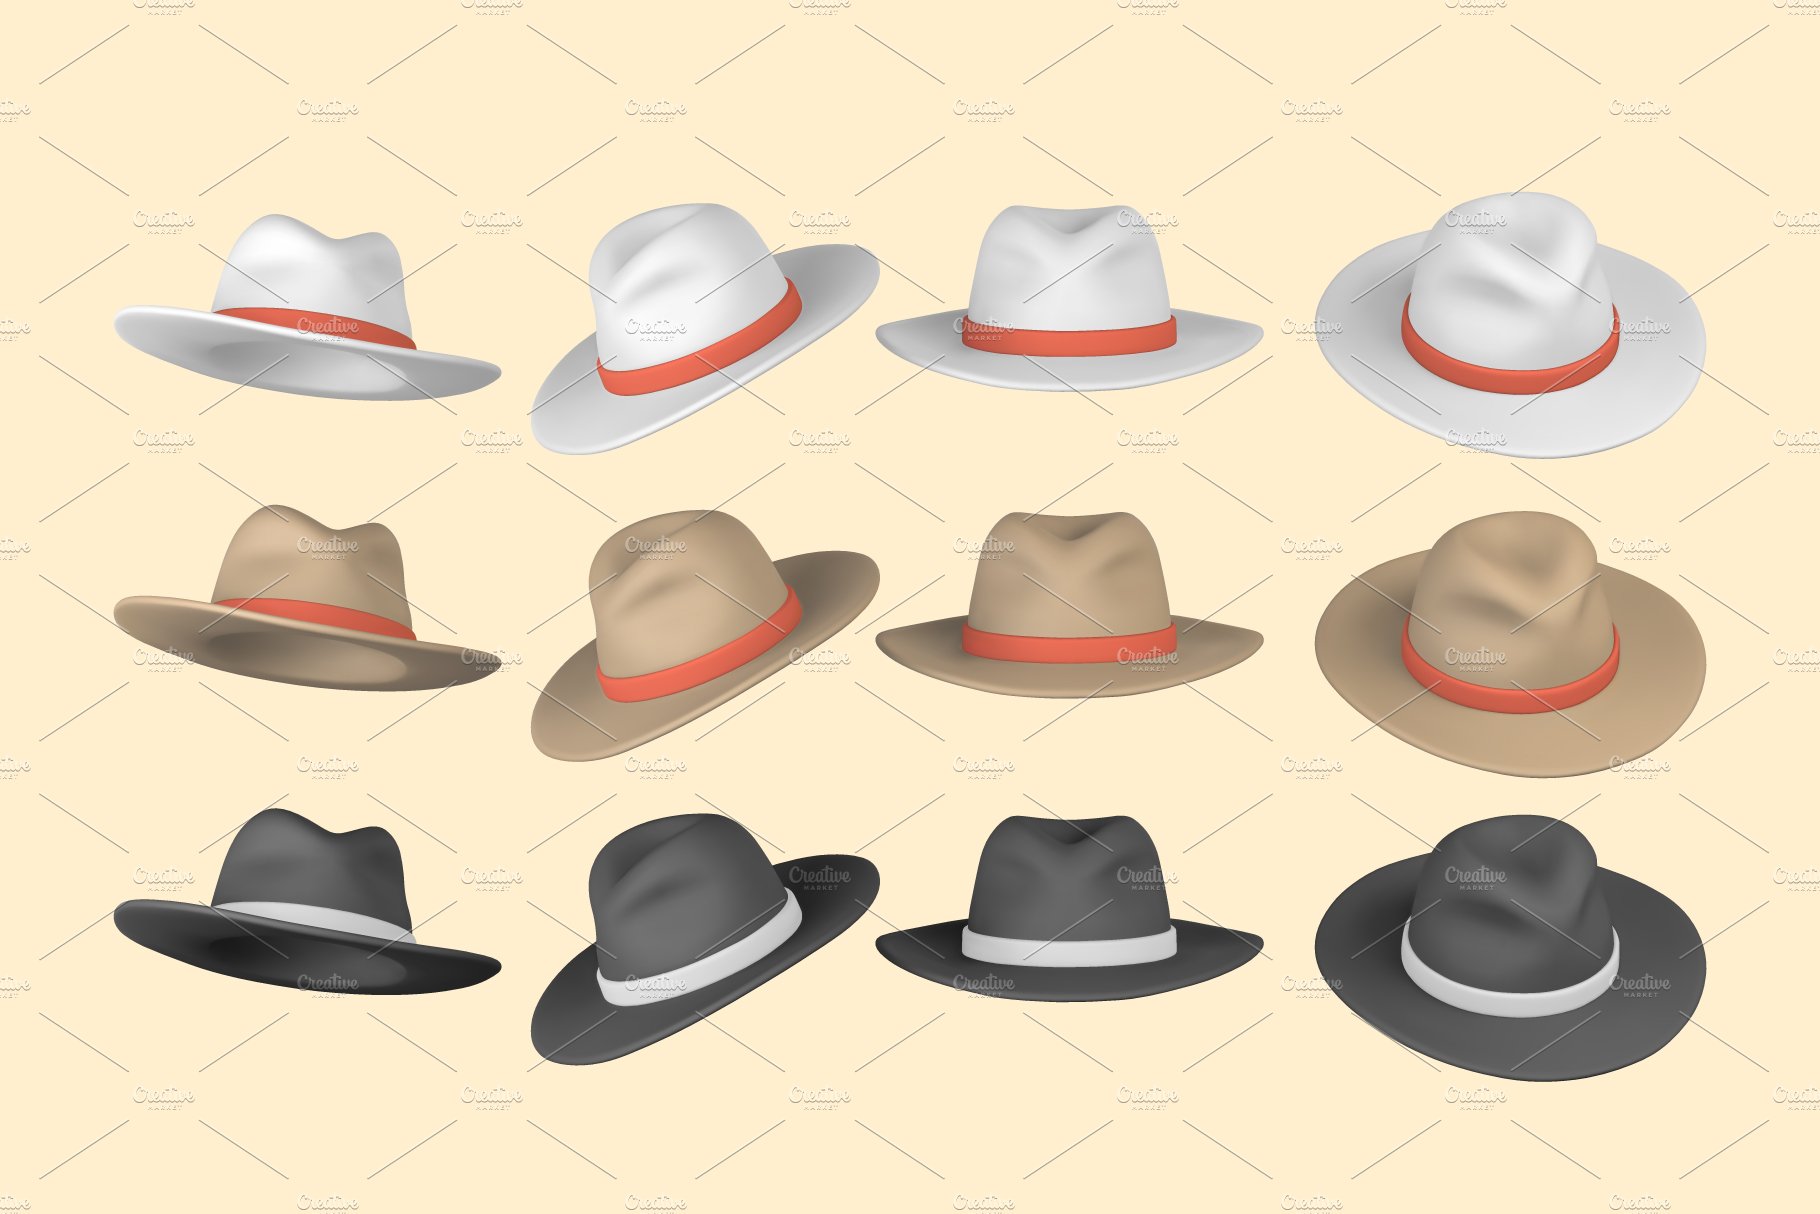 Set of realistic mens hat cover image.